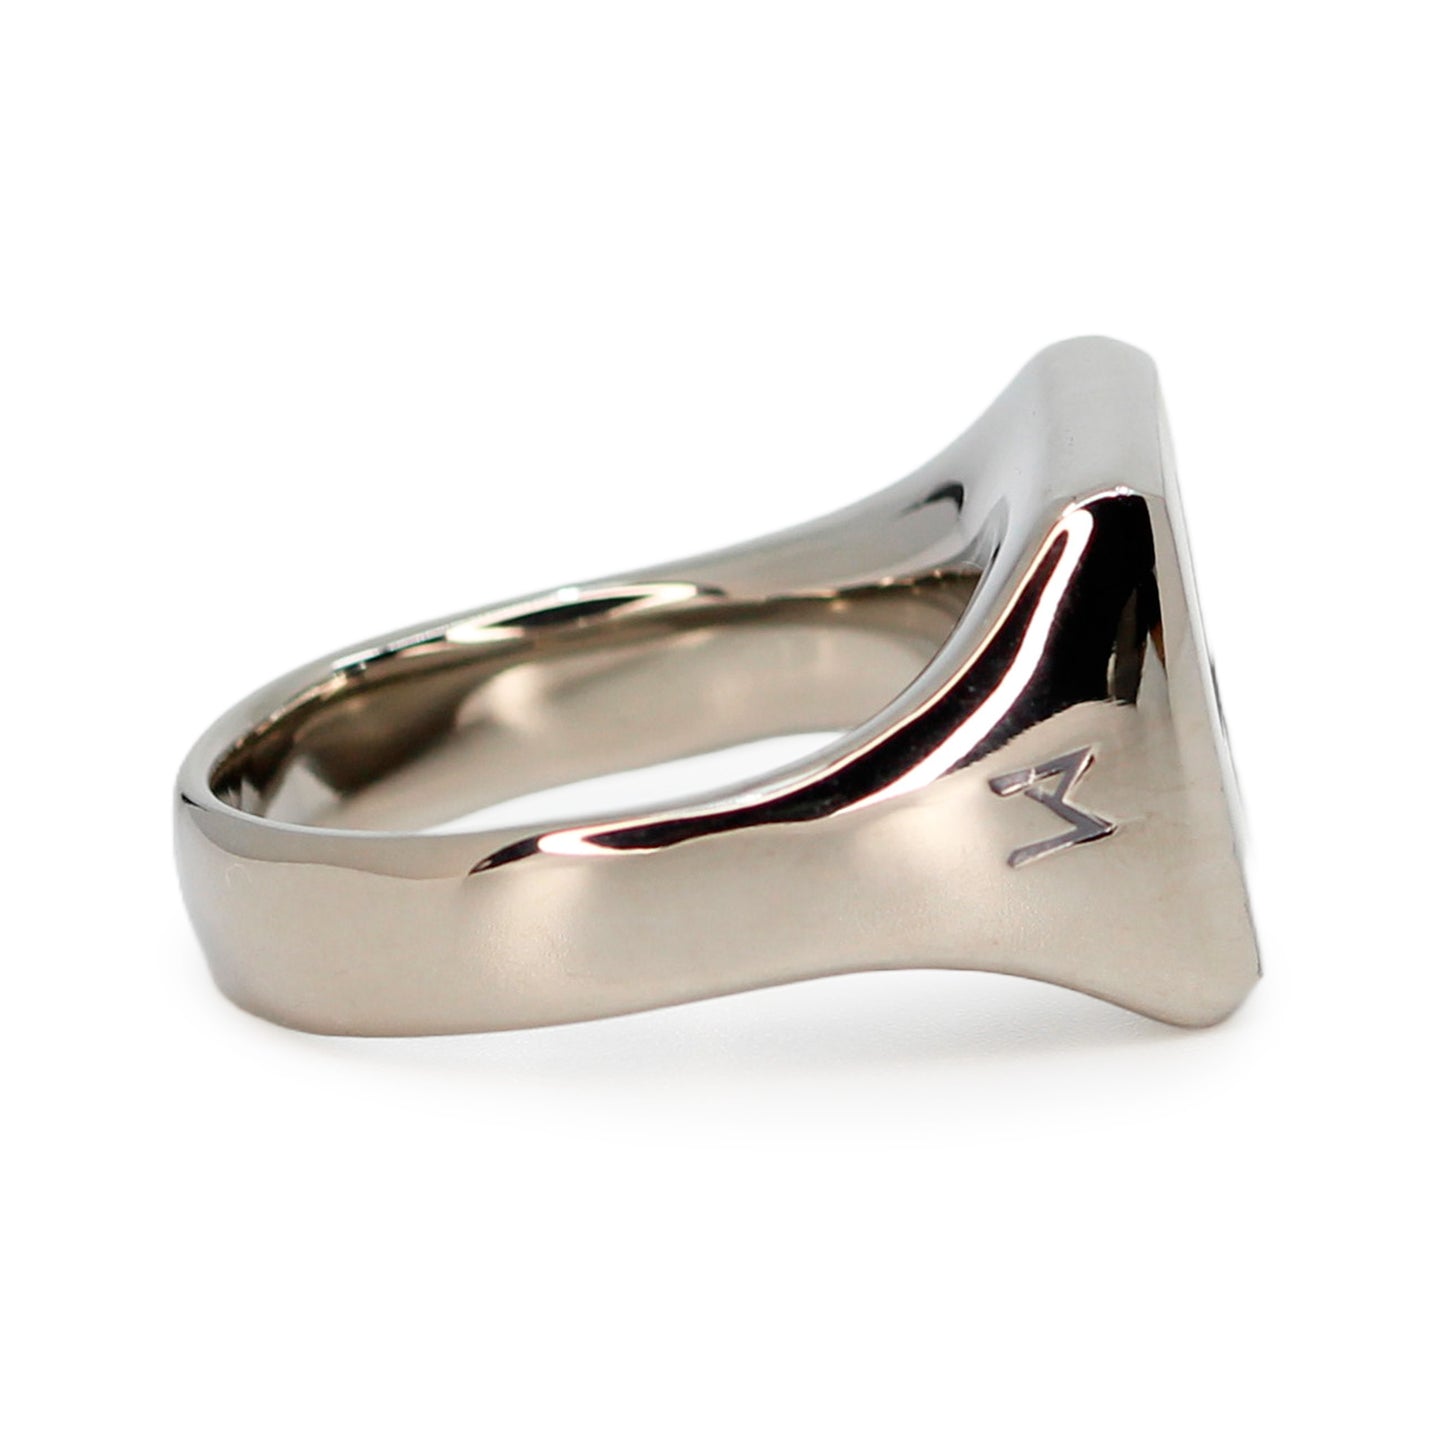 Single silver-colored titanium signet ring, 15x15 mm wide surface with an engraved palm tree. Image shows side view of the ring